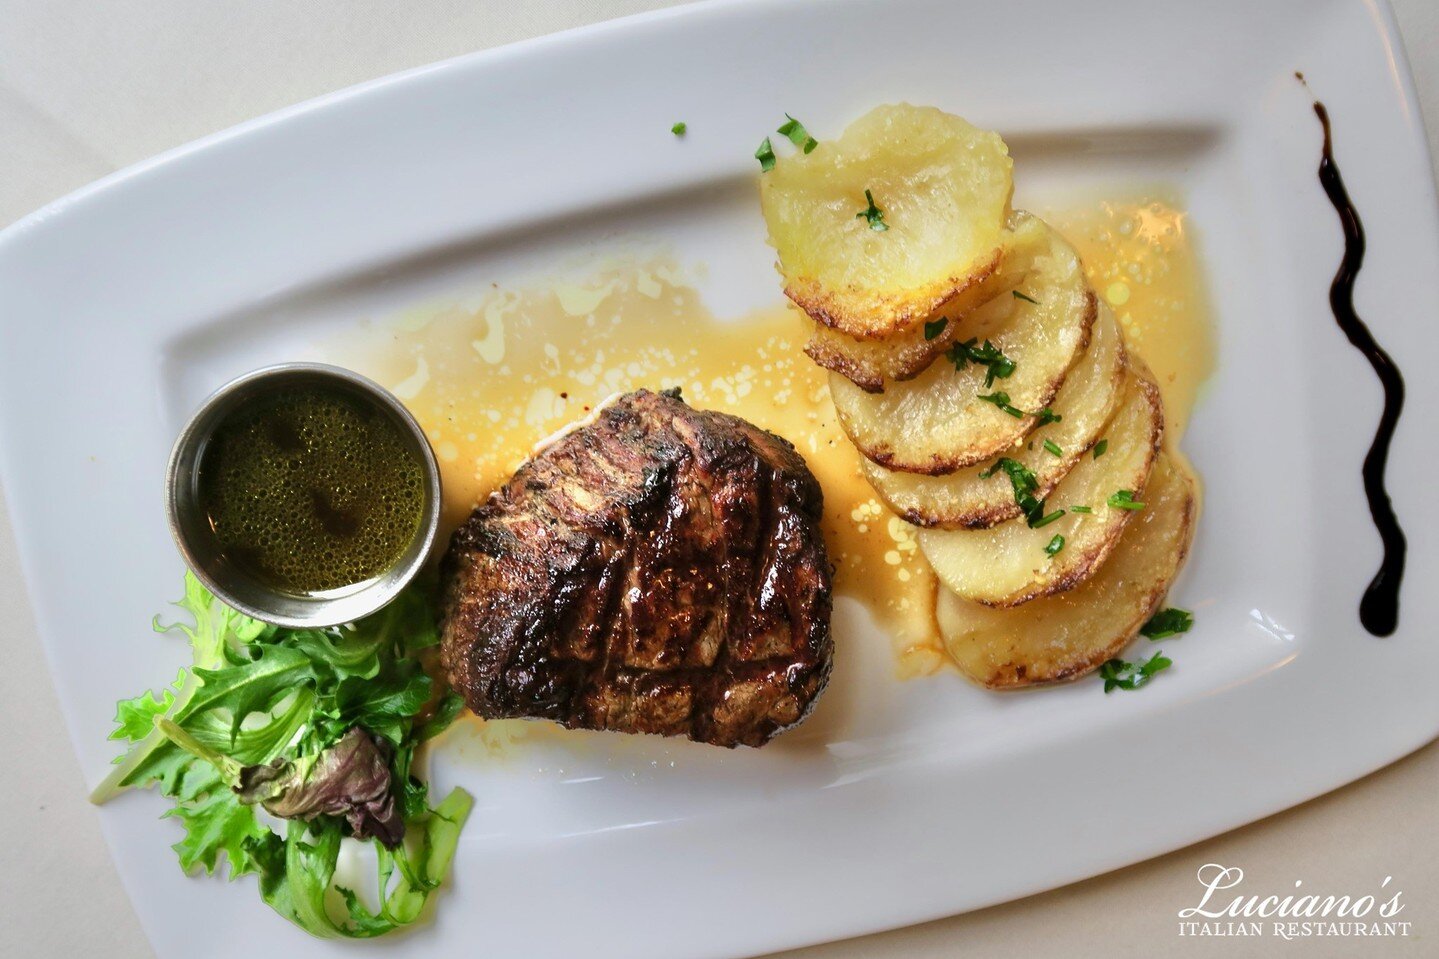 Today's the perfect day to indulge in our succulent Filet...Buon appetito!